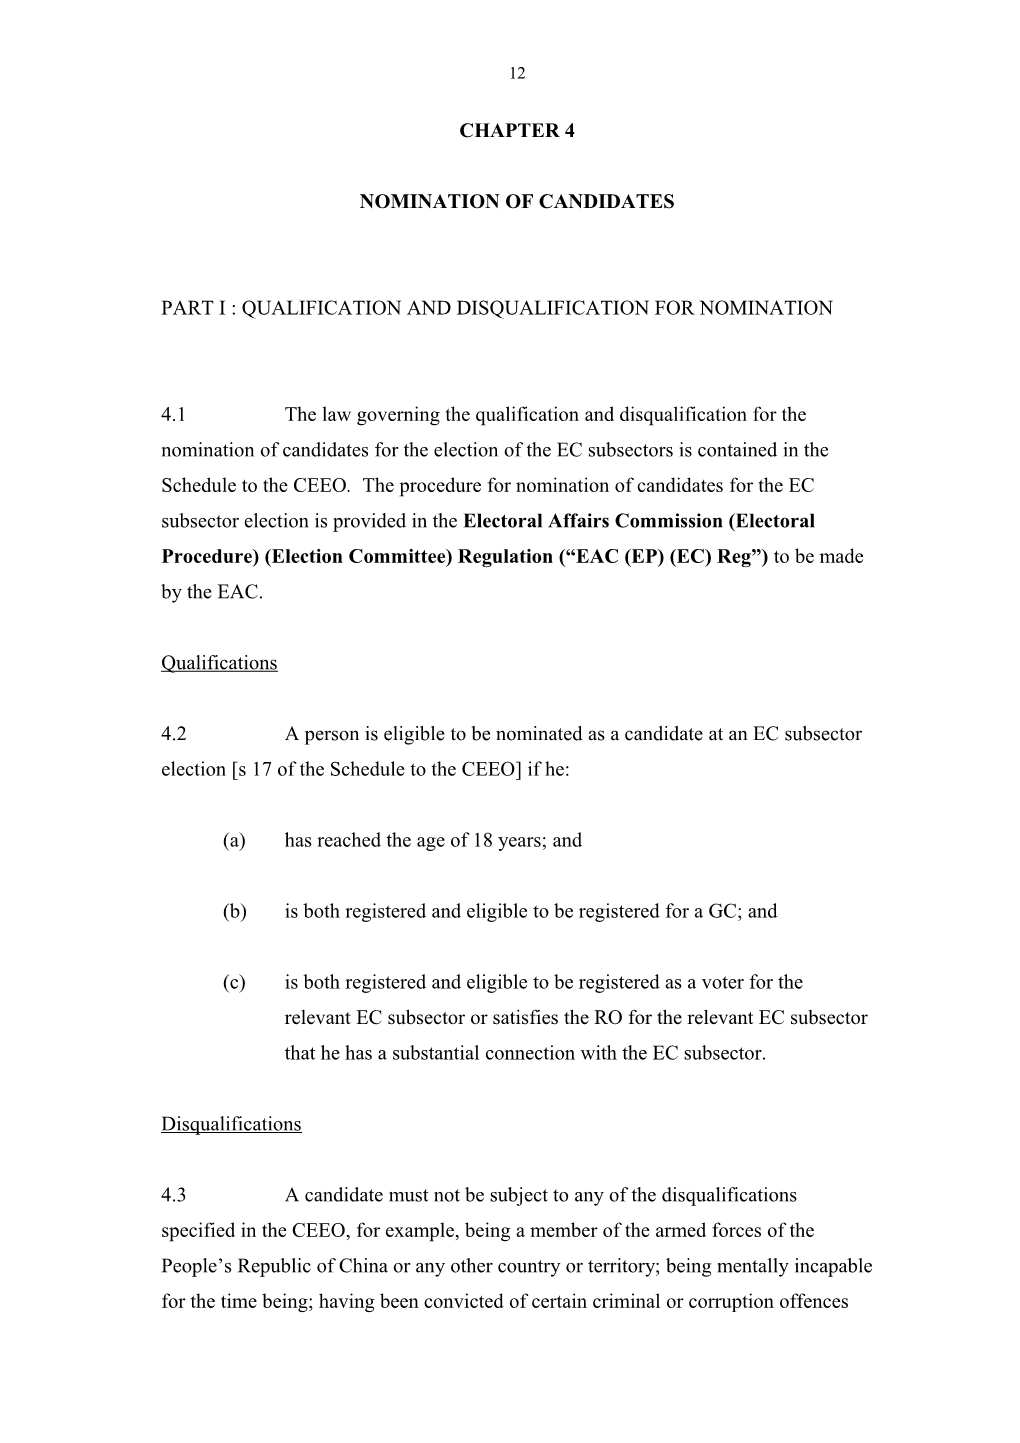 PART I : Qualification and Disqualification for Nomination